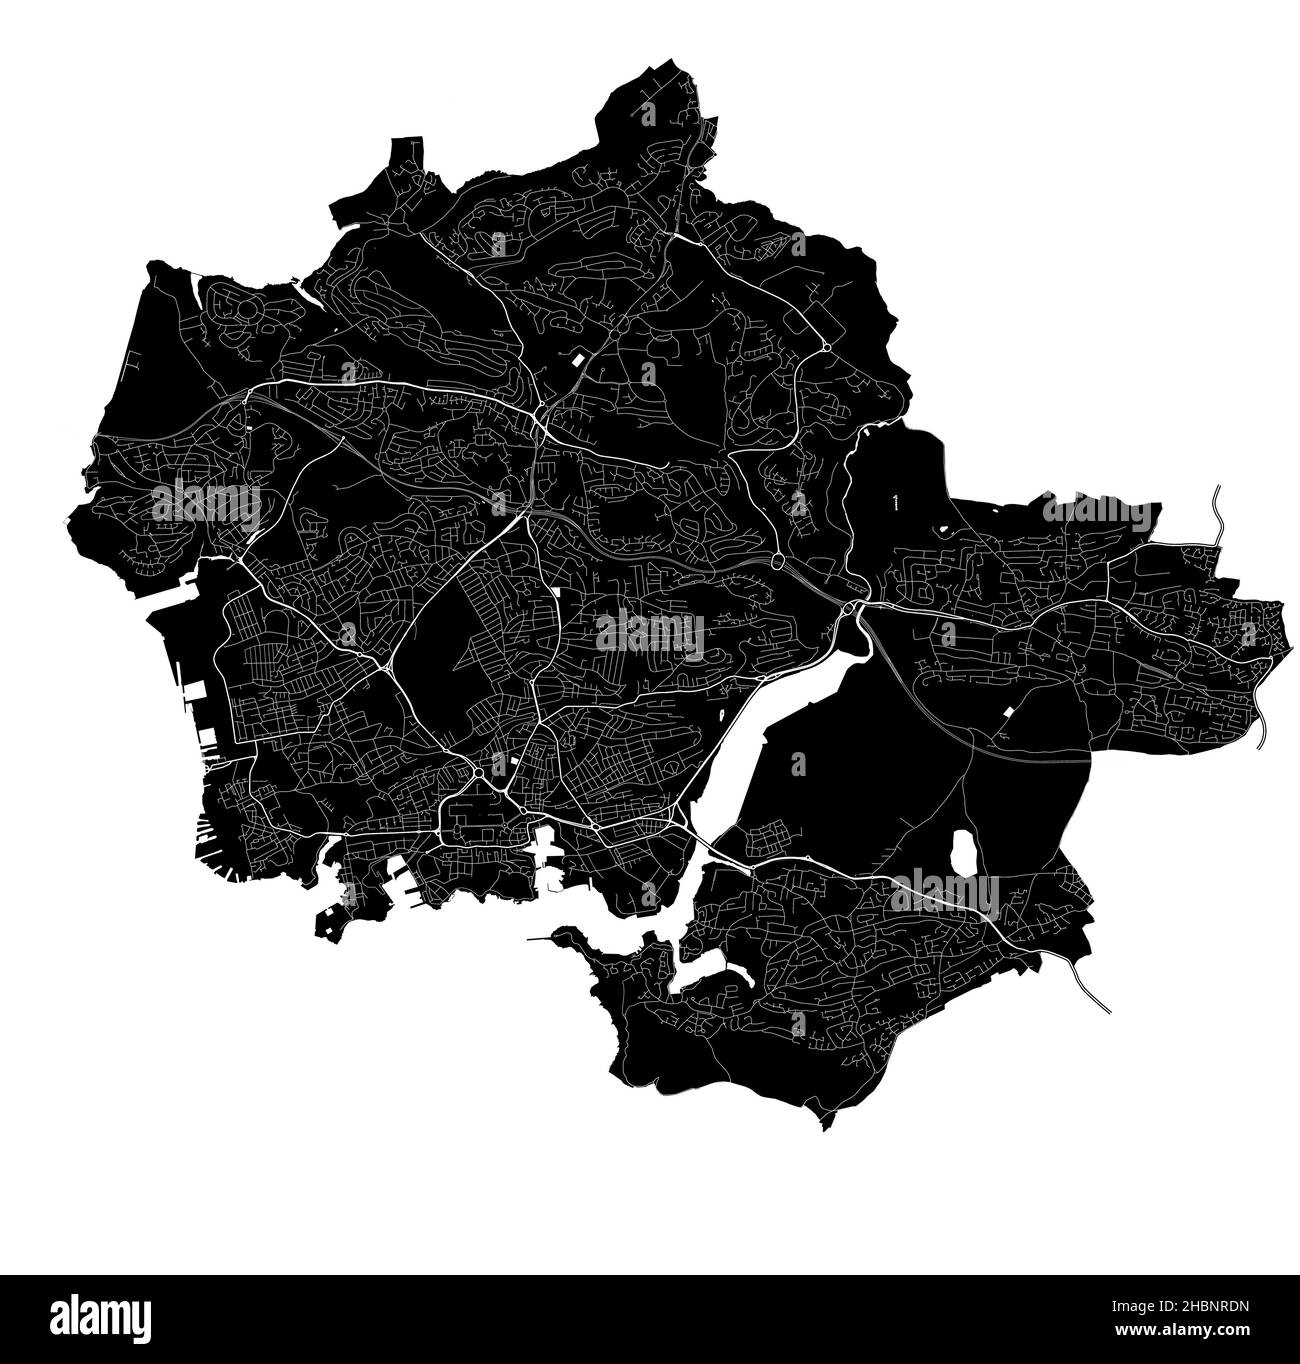 Plymouth, England, high resolution vector map with city boundaries, and editable paths. The city map was drawn with white areas and lines for main roa Stock Vector